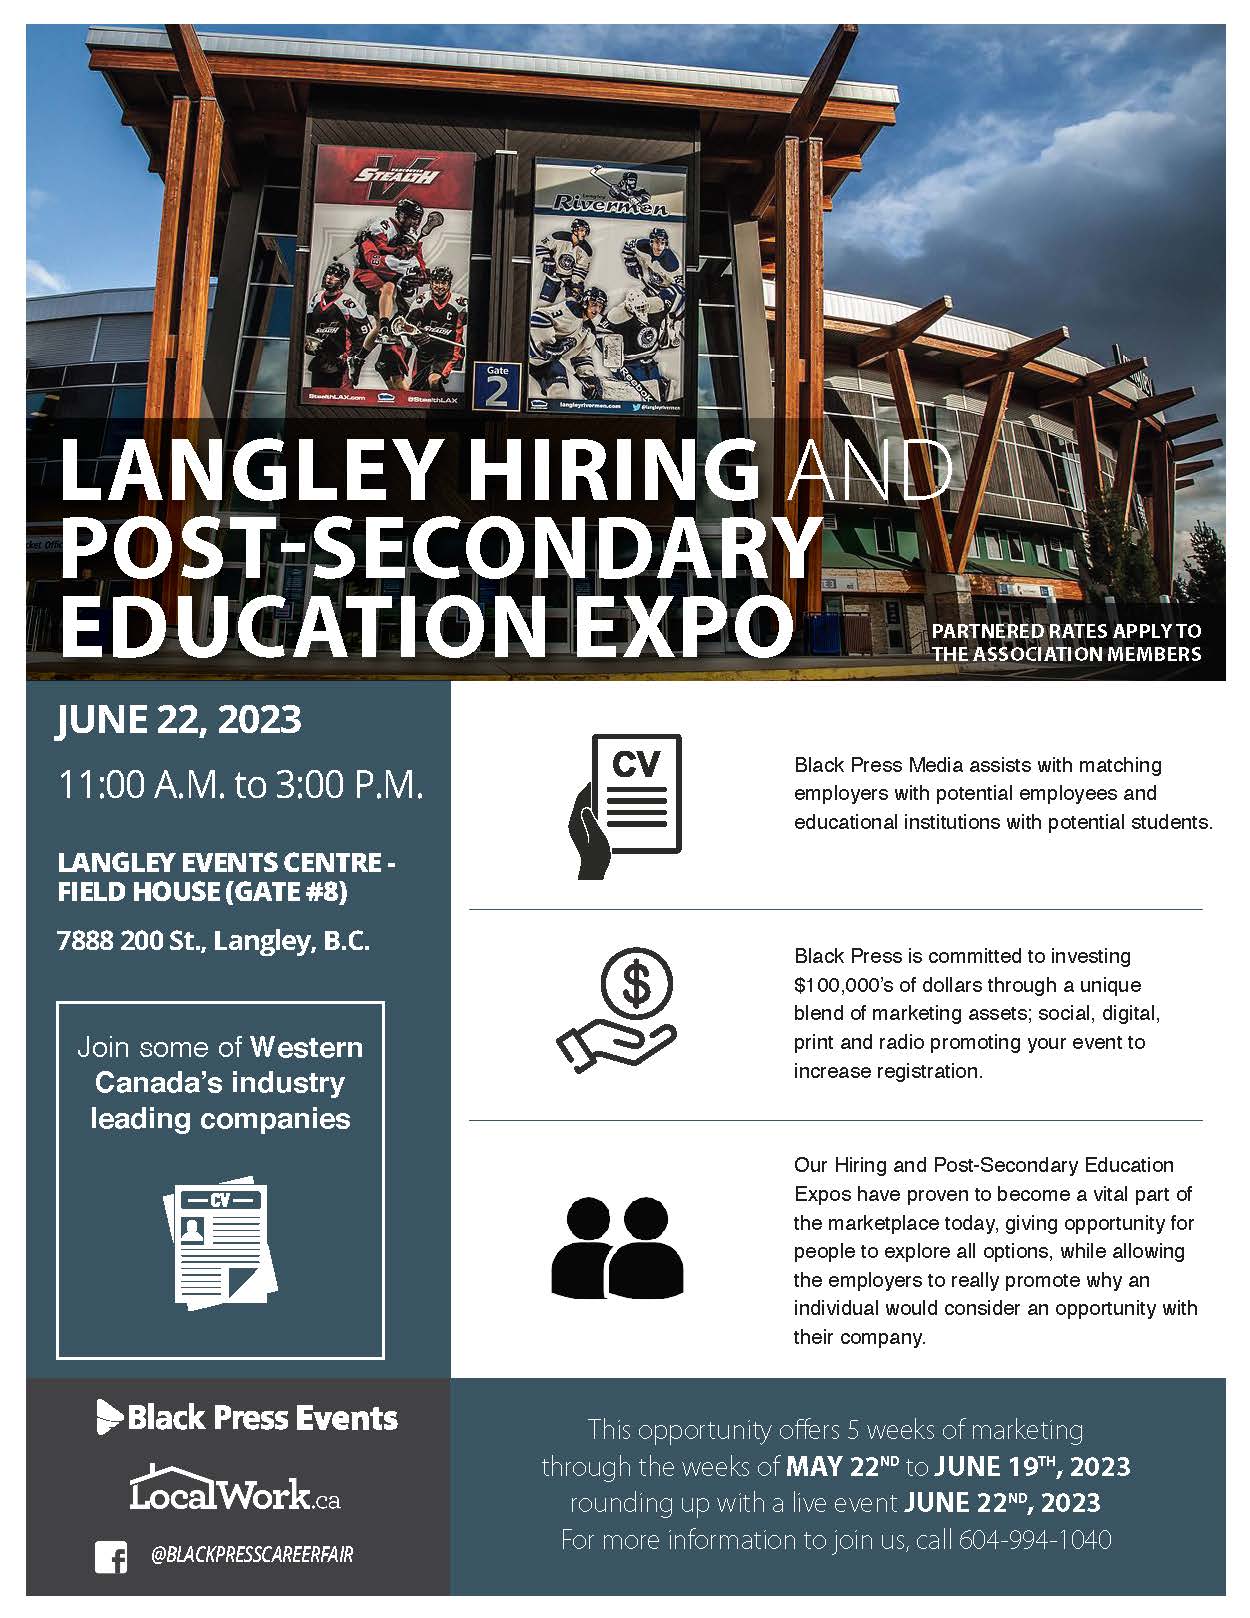 Langley Hiring & Post-Secondary Expo with Black Press - June 22